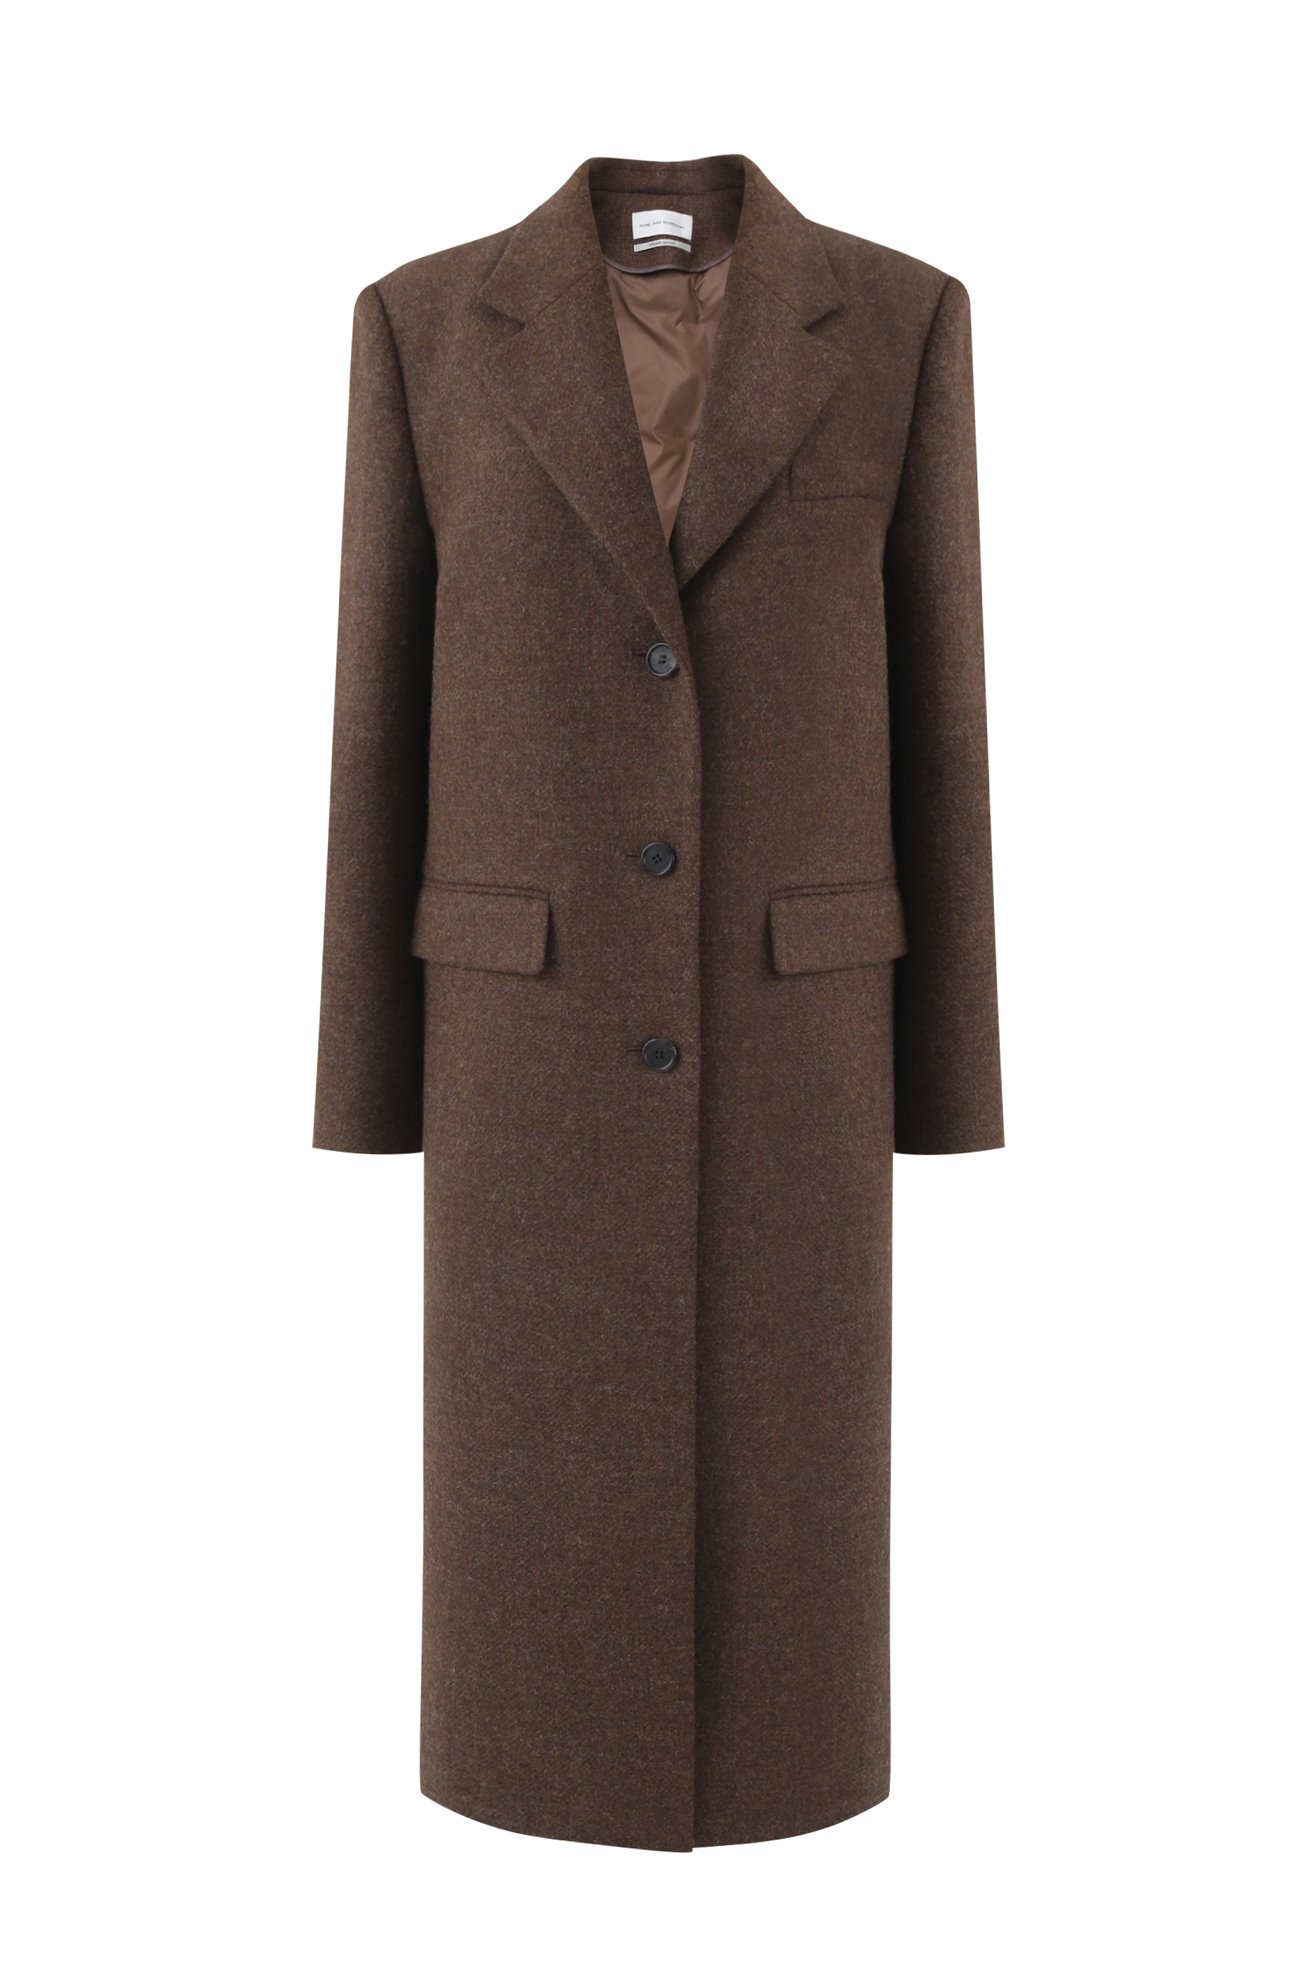 British Wool Coat with Detachable Duck Down Vest (BROWN)<br><sub><mark><strong>ATELIER EDITION </strong></sub>